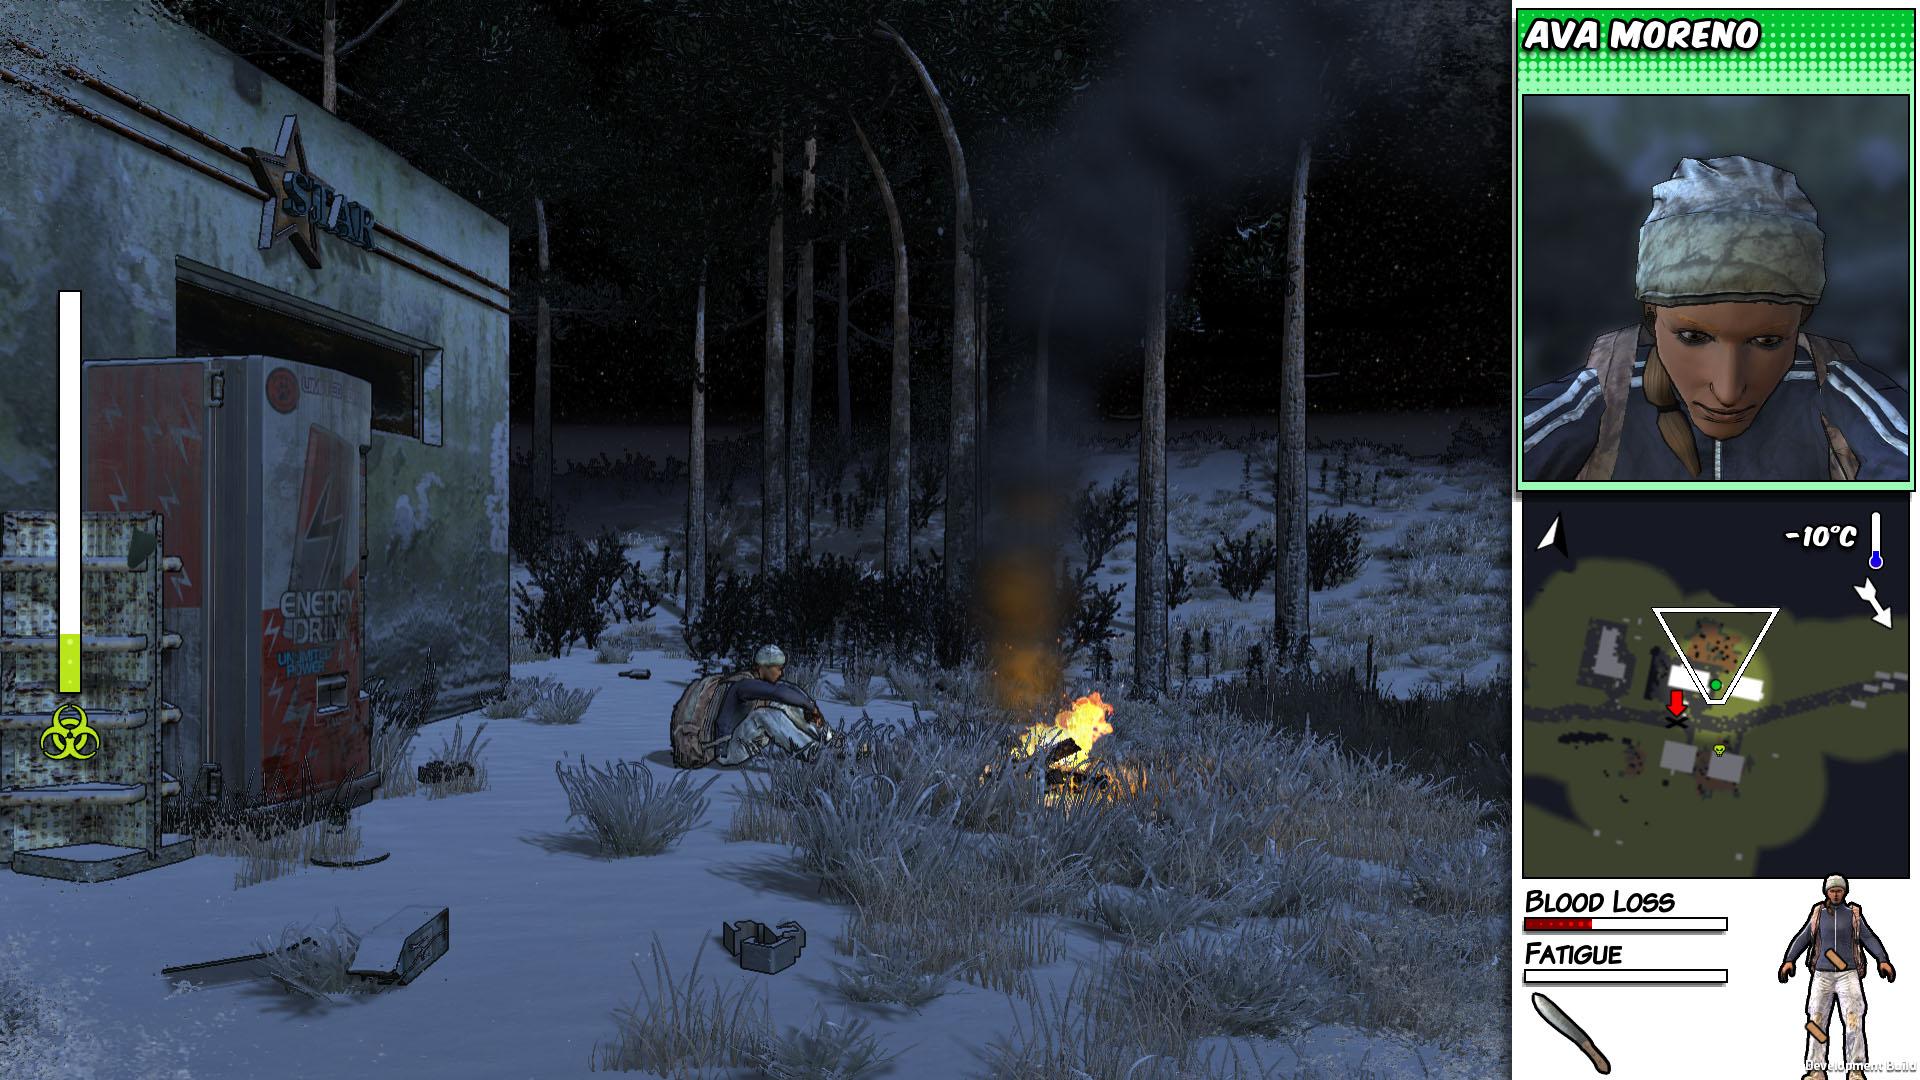 Screenshot №1 from game Survivalist: Invisible Strain